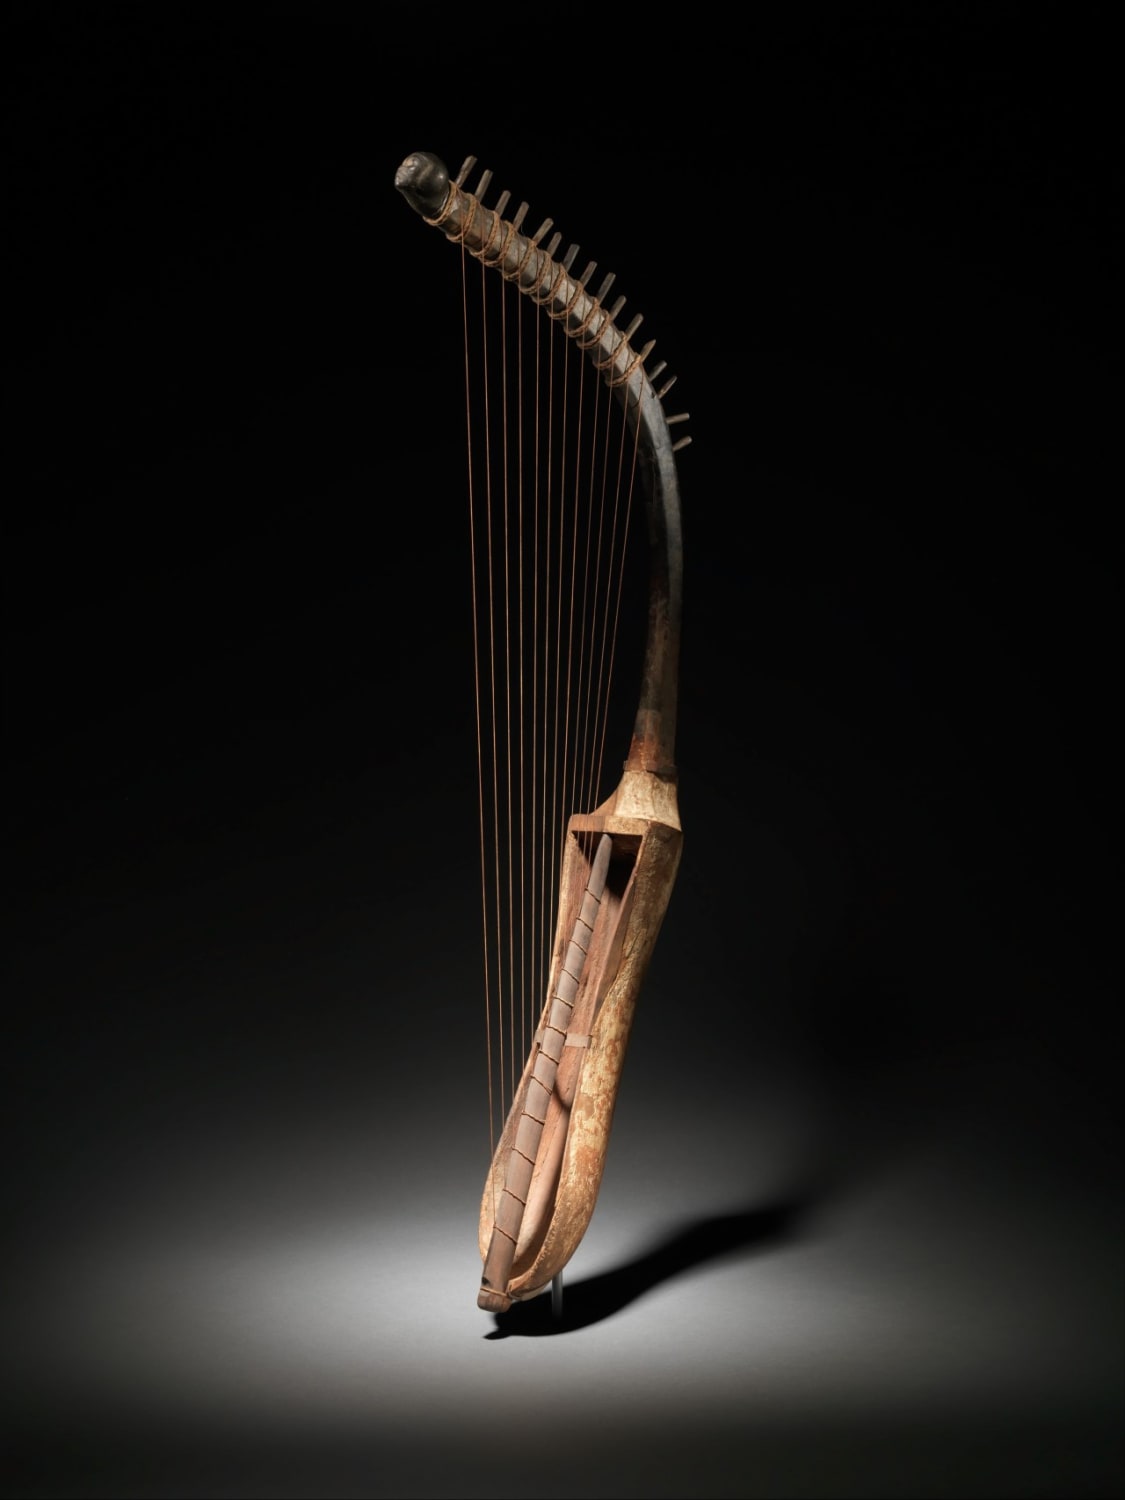 A 3,300 year-old Egyptian “Shoulder Harp”. These instruments were traditionally played by women at ceremonial events or religious rites. Circa 1300 BC. #MetMuseum